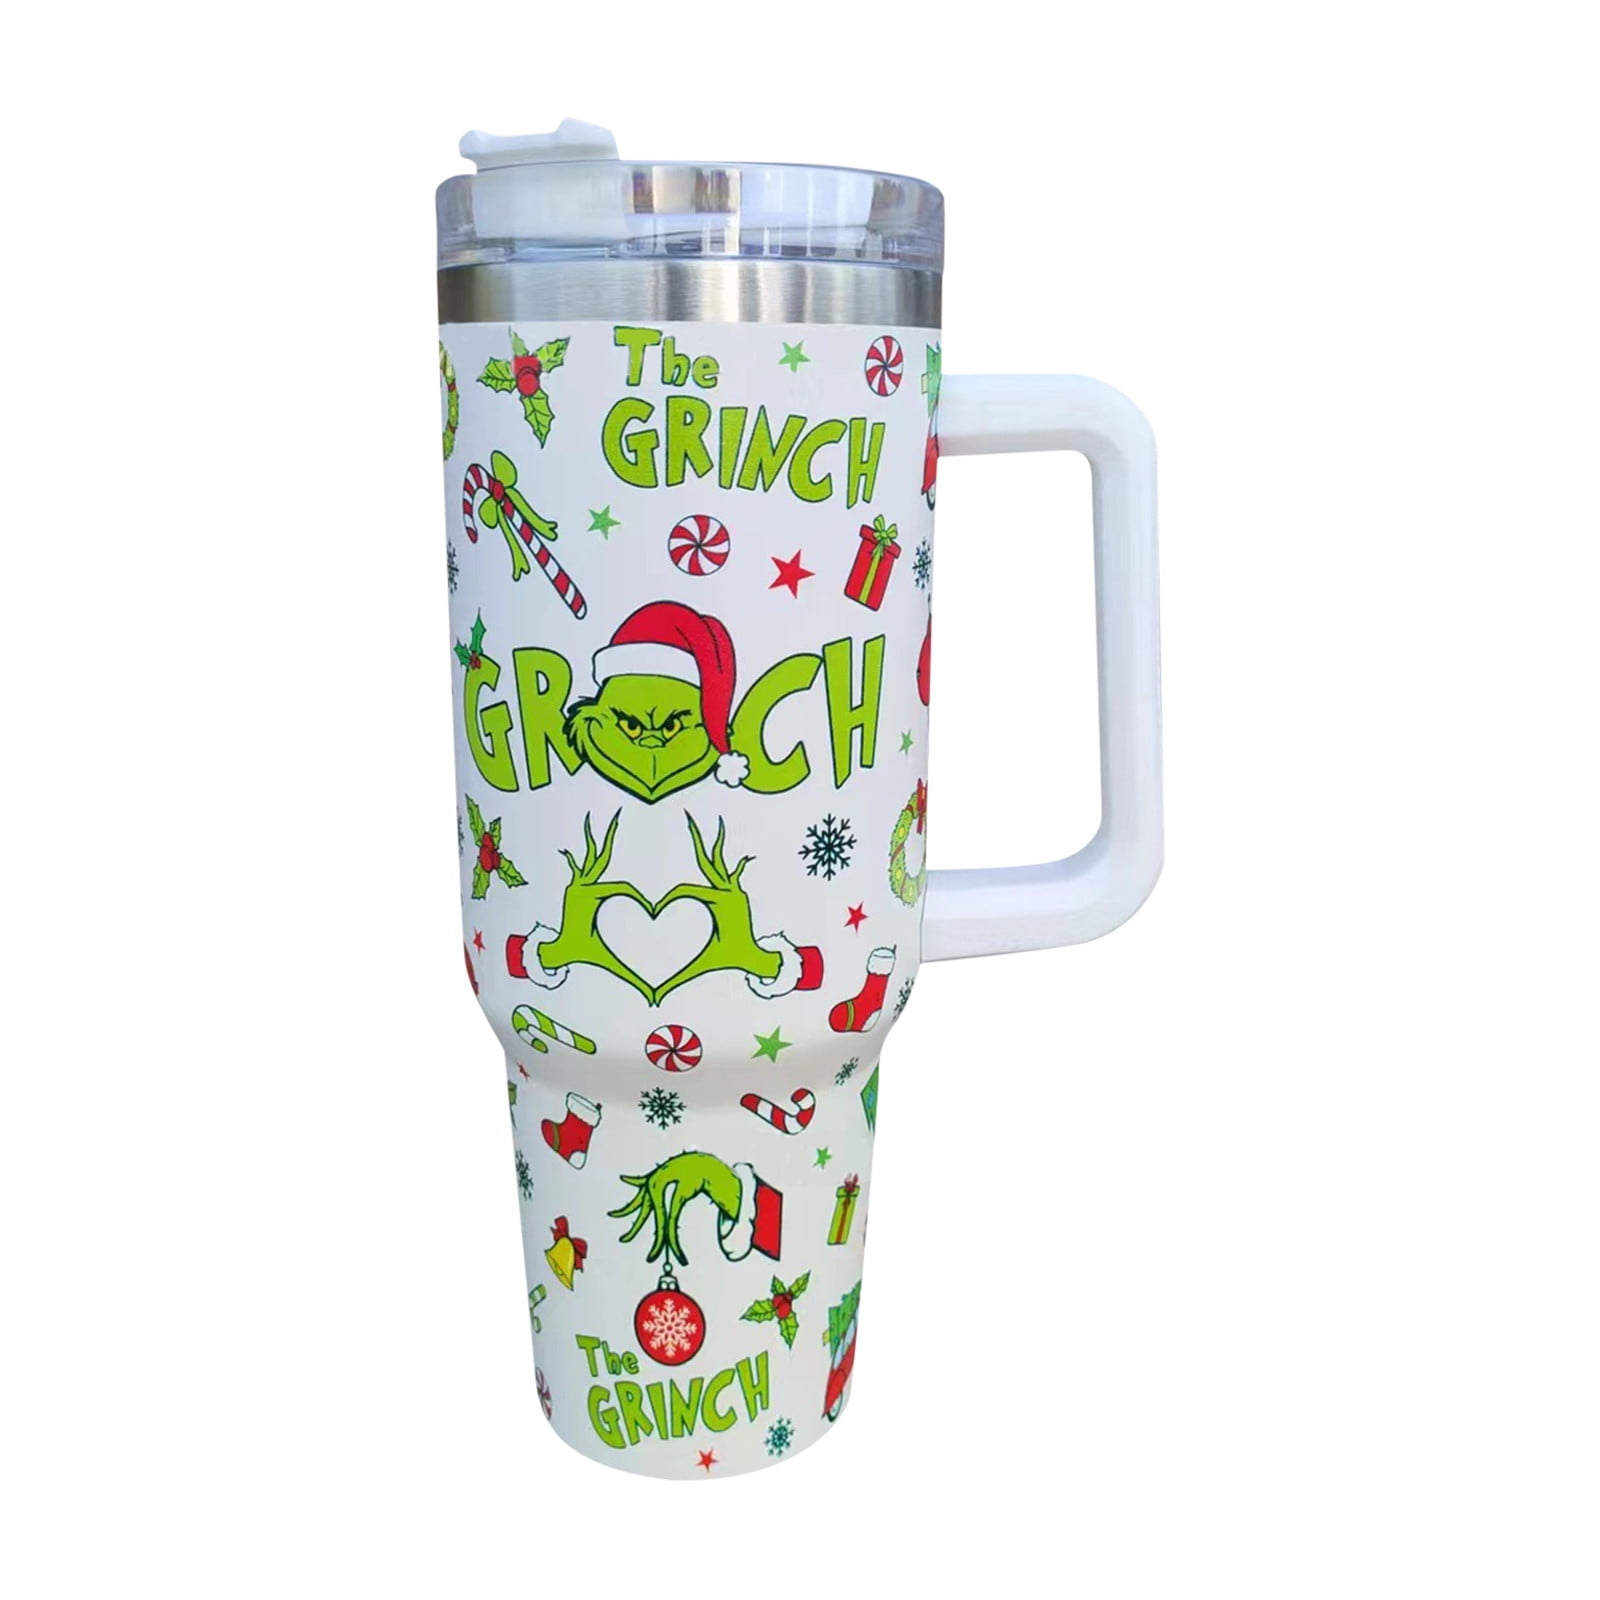 Grinch Tumbler | Personalized 40oz Tumbler with Handle and Straw | Stainless Steel Insulated Cup | Travel Cup | Double Wall Coffee Cup for Hot and